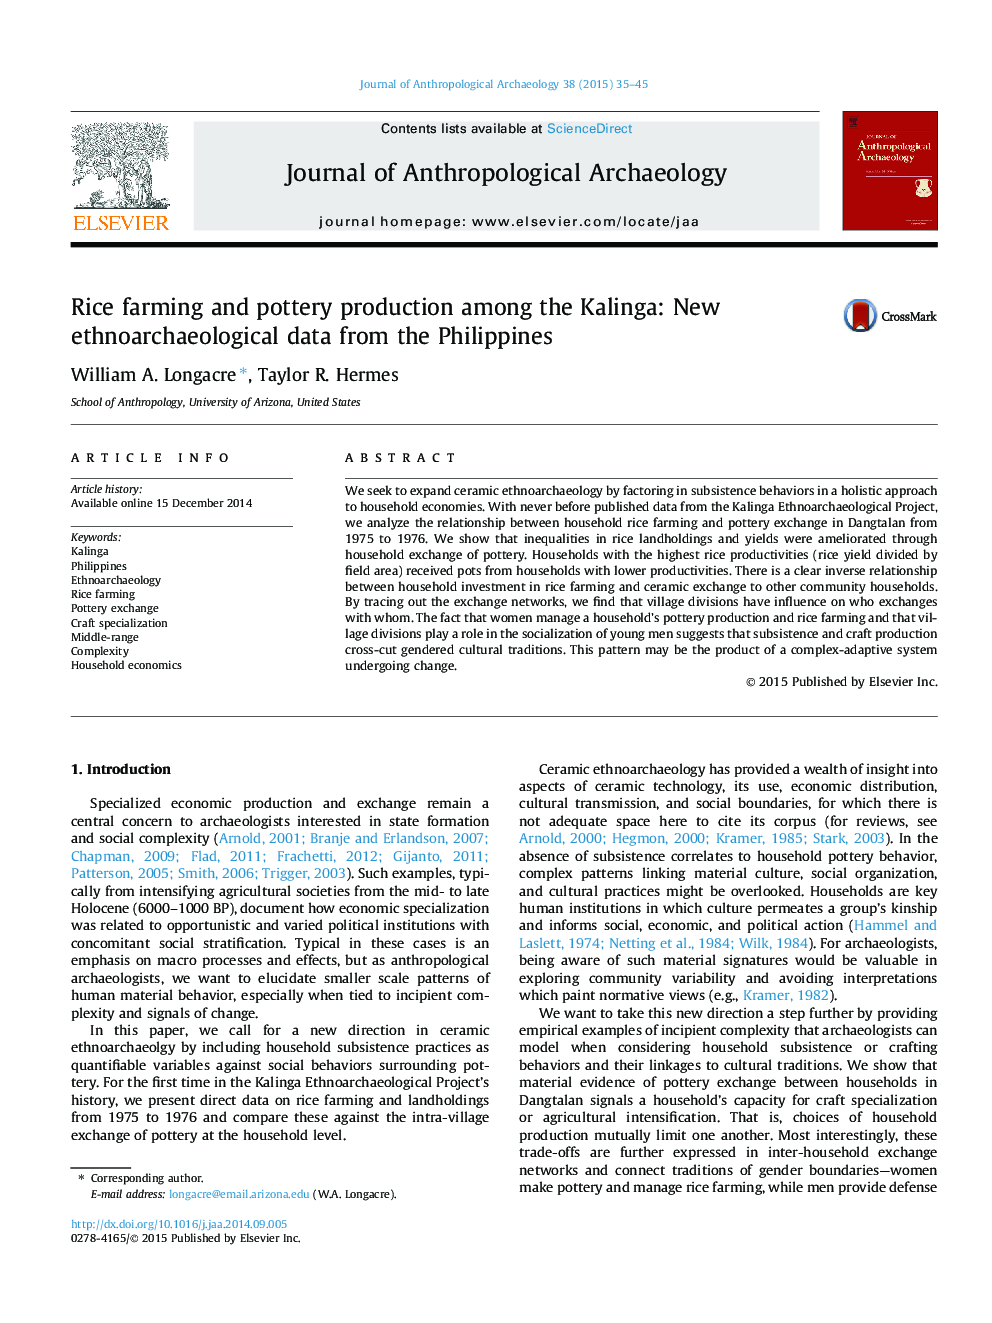 Rice farming and pottery production among the Kalinga: New ethnoarchaeological data from the Philippines